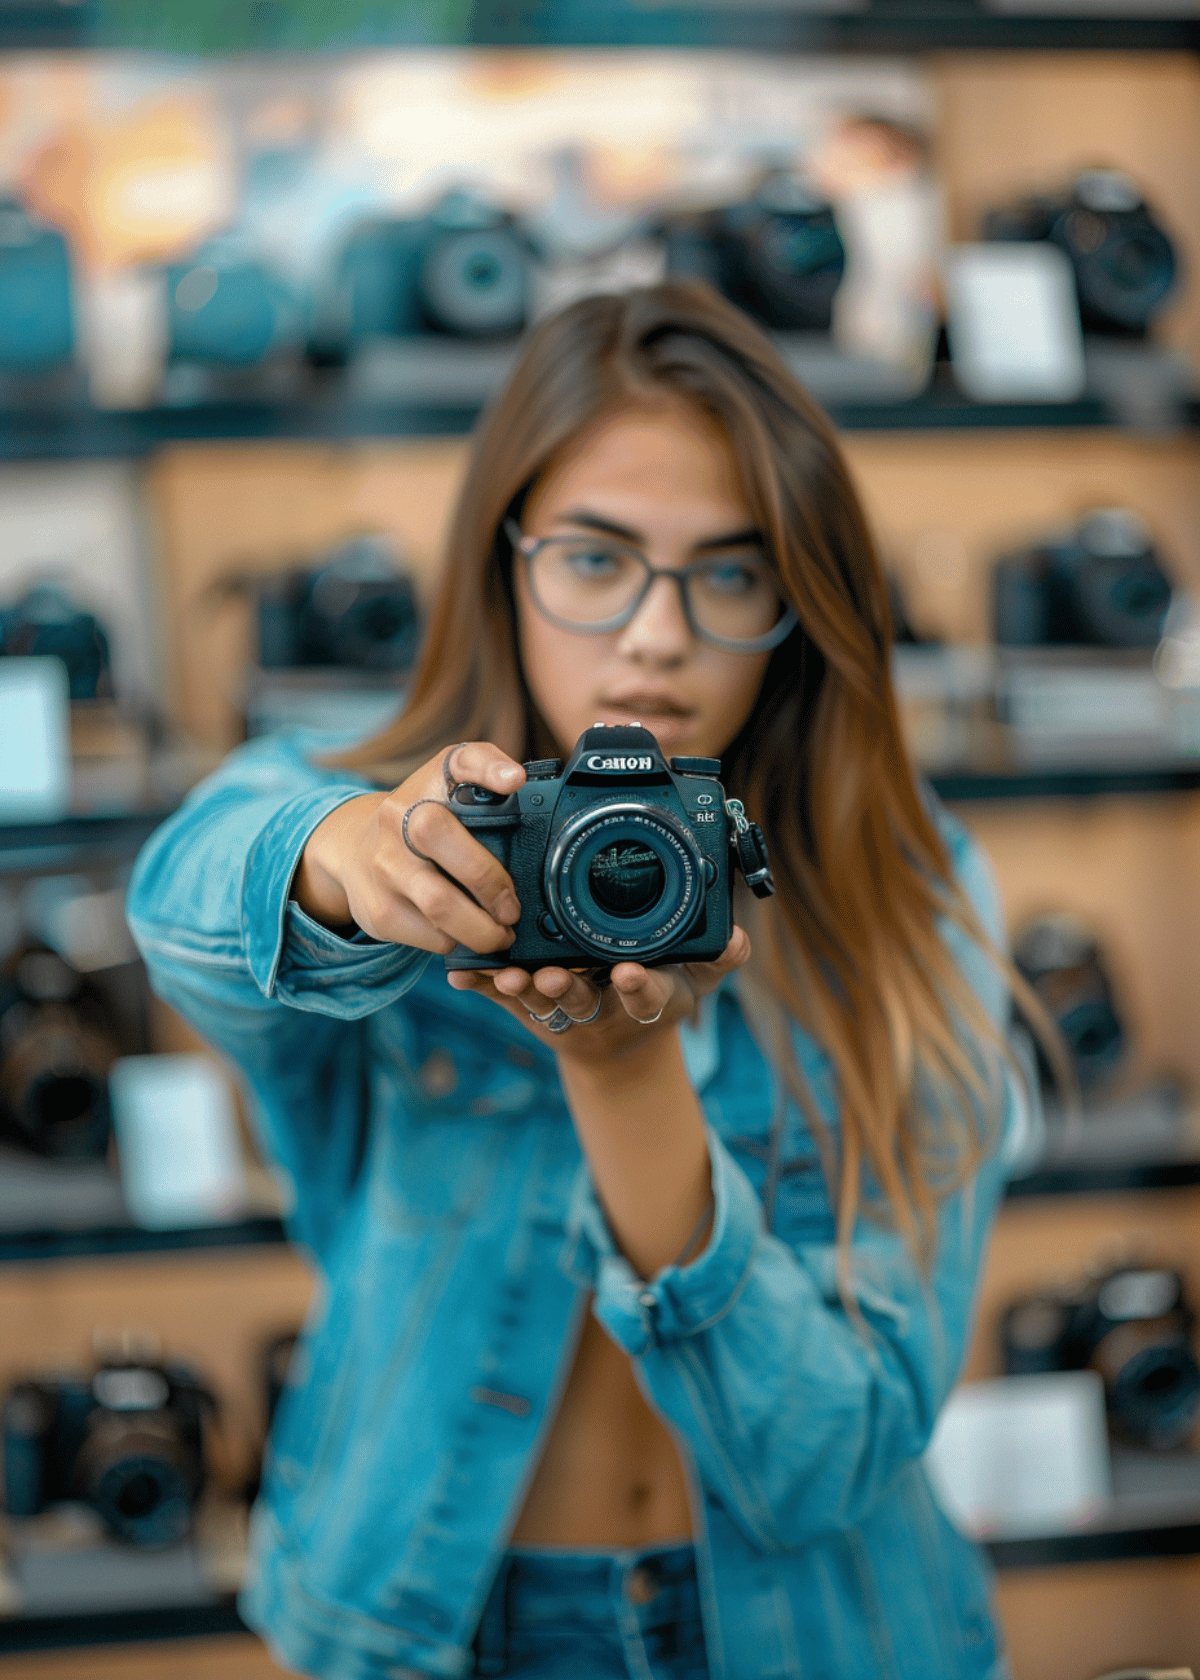 How to Choose the Best Camera for Photos and Videos